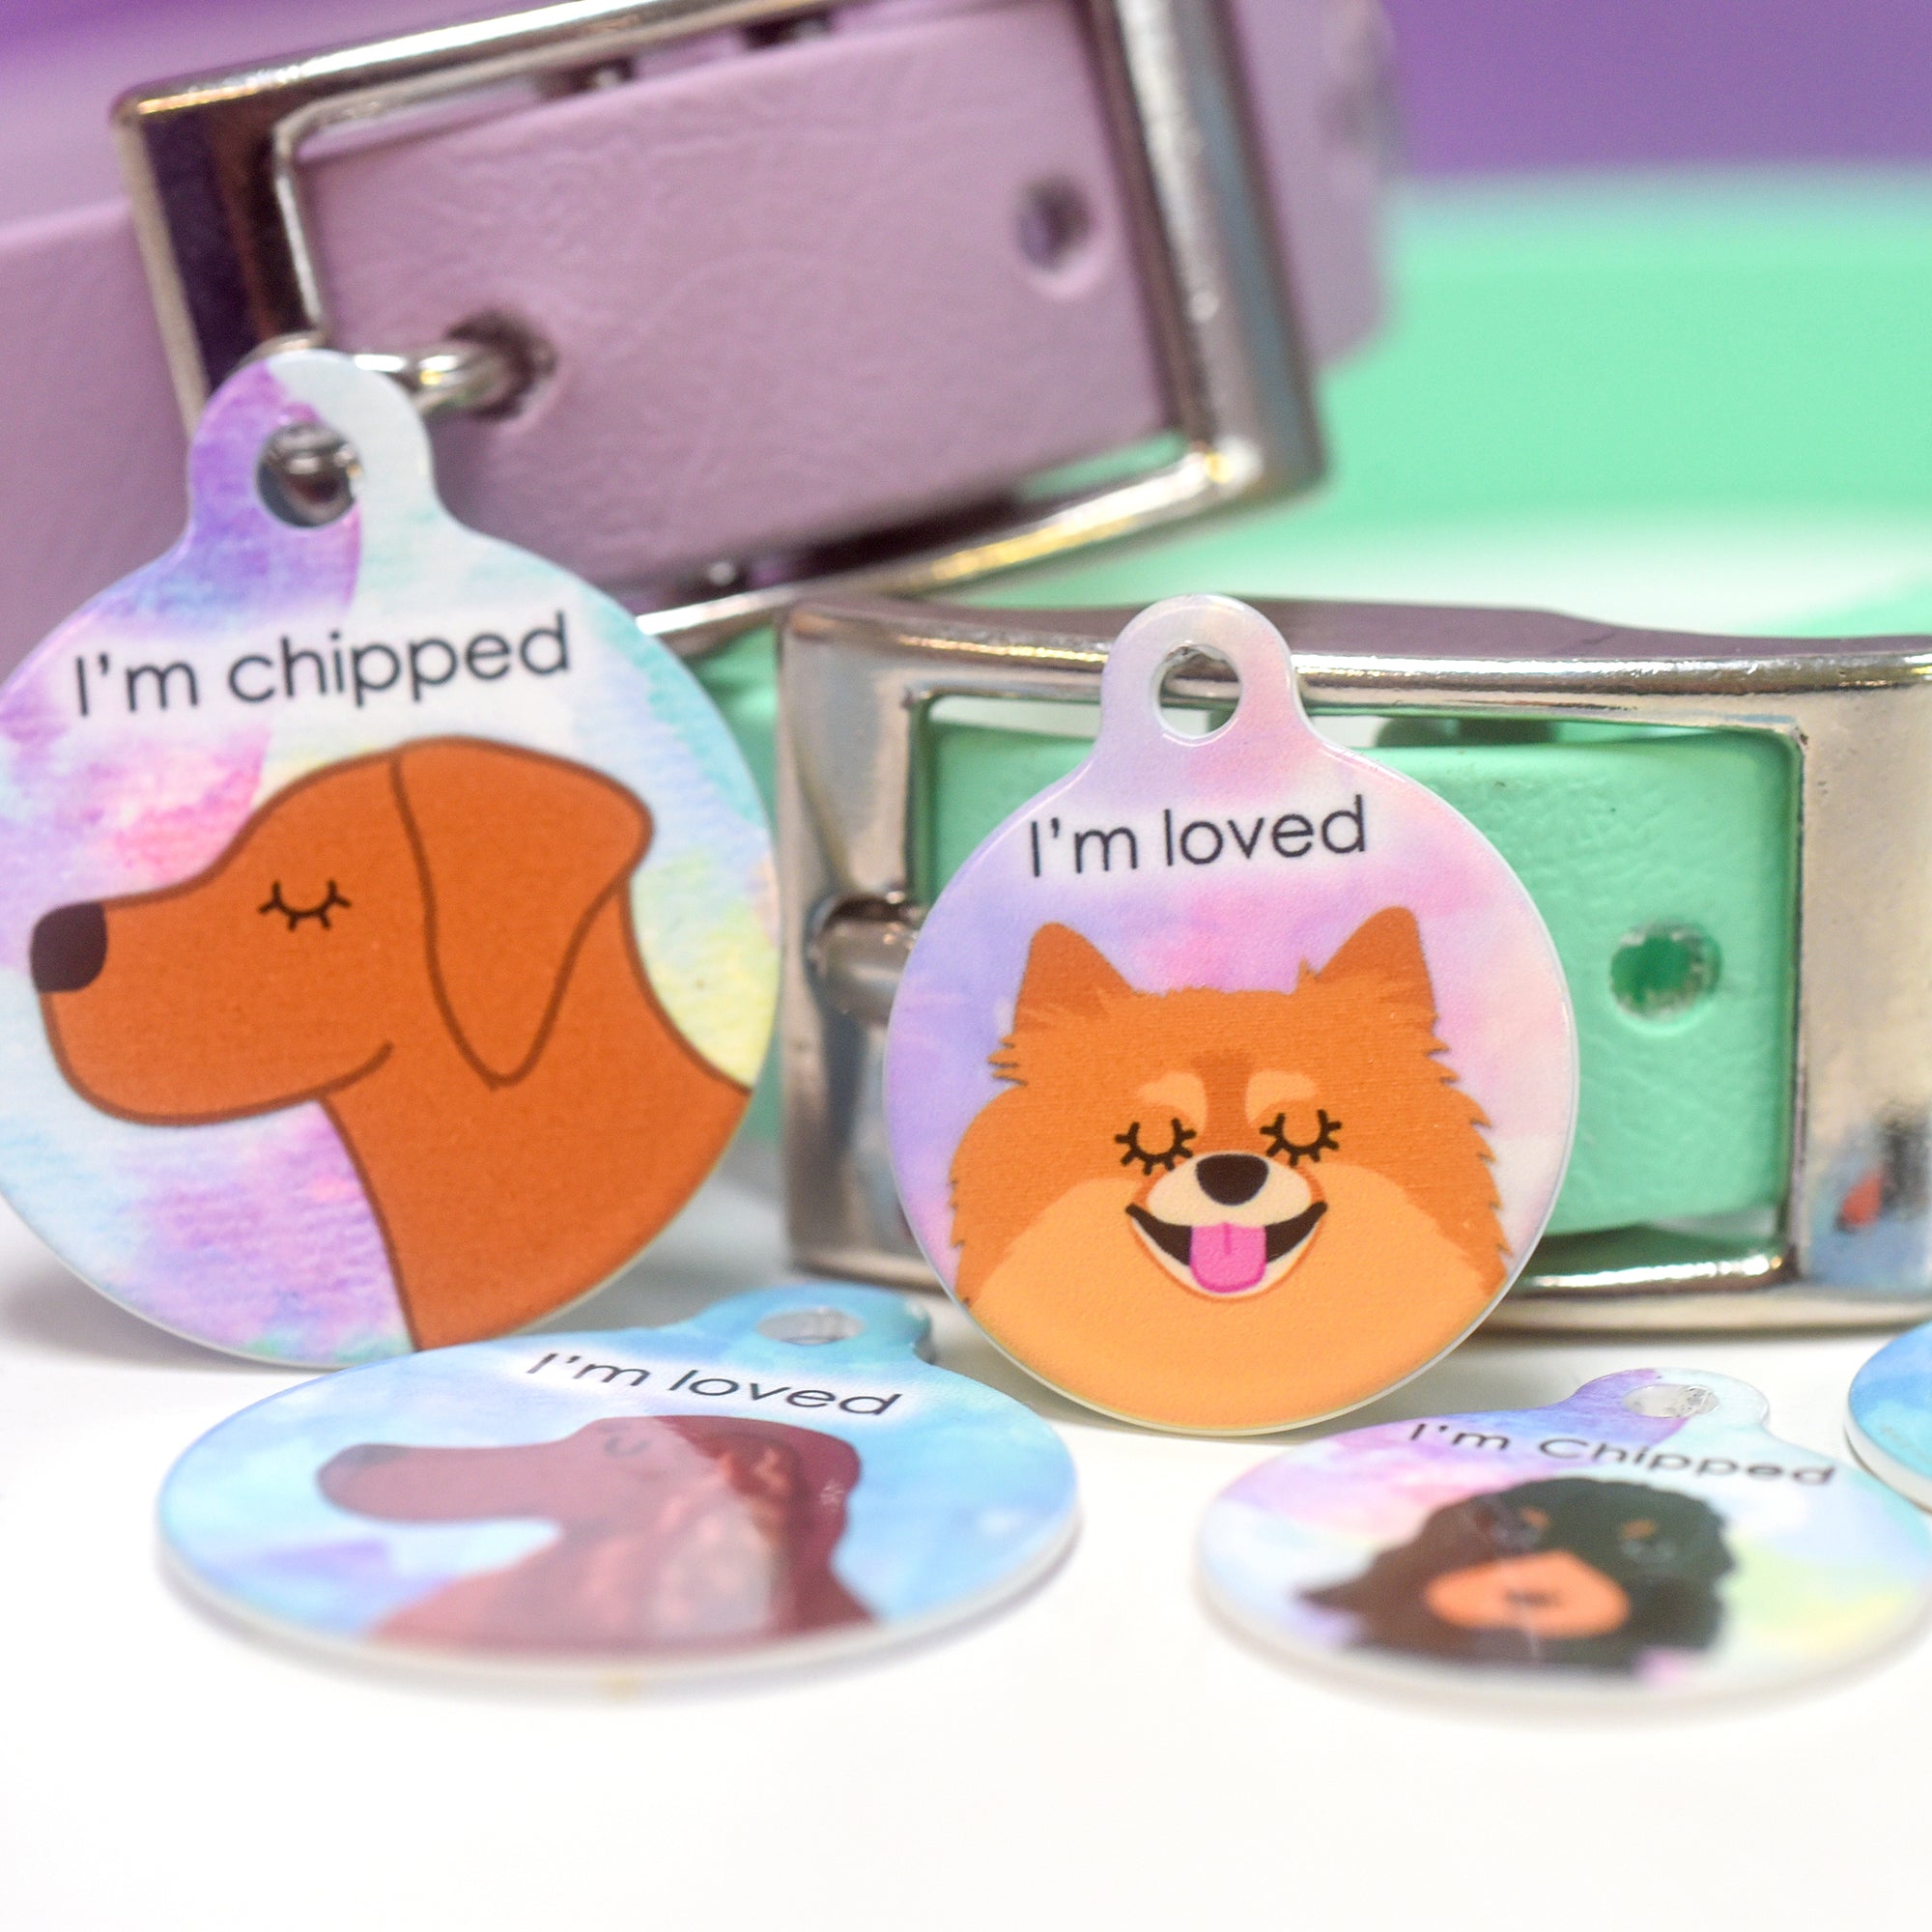 Watercolour Personalised Dog Tag